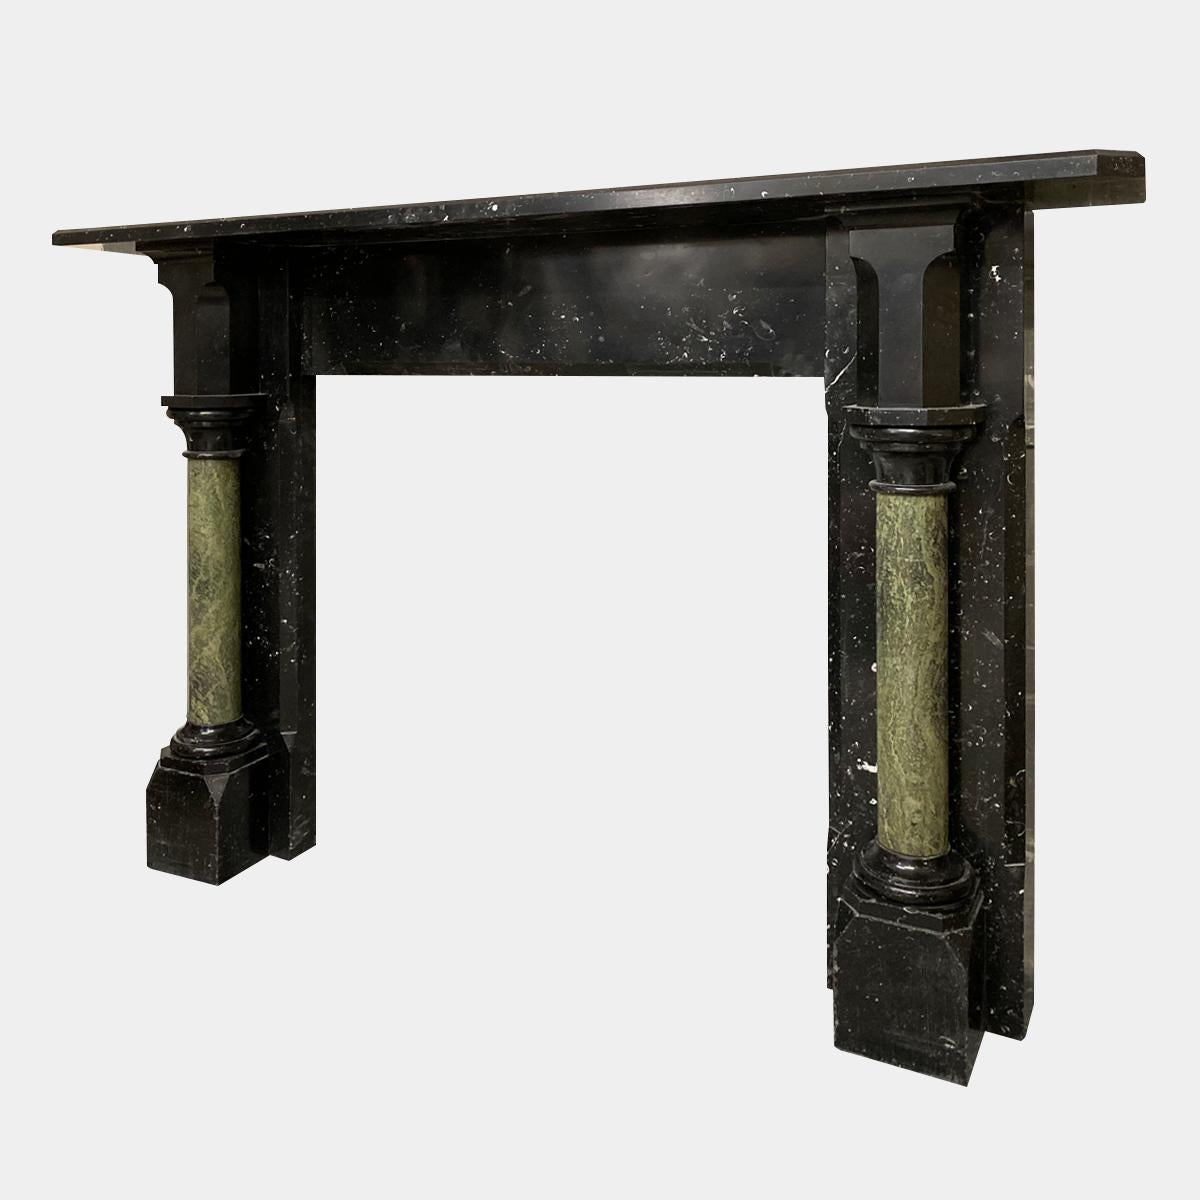 A large and imposing Gothic Revival fireplace in Irish black Kilkenny fossil marble with green Connemara marble columns. A plain frieze with simple tapered moulding, flanked by semi hexagonal corner blocks which are supported by fully disengaged